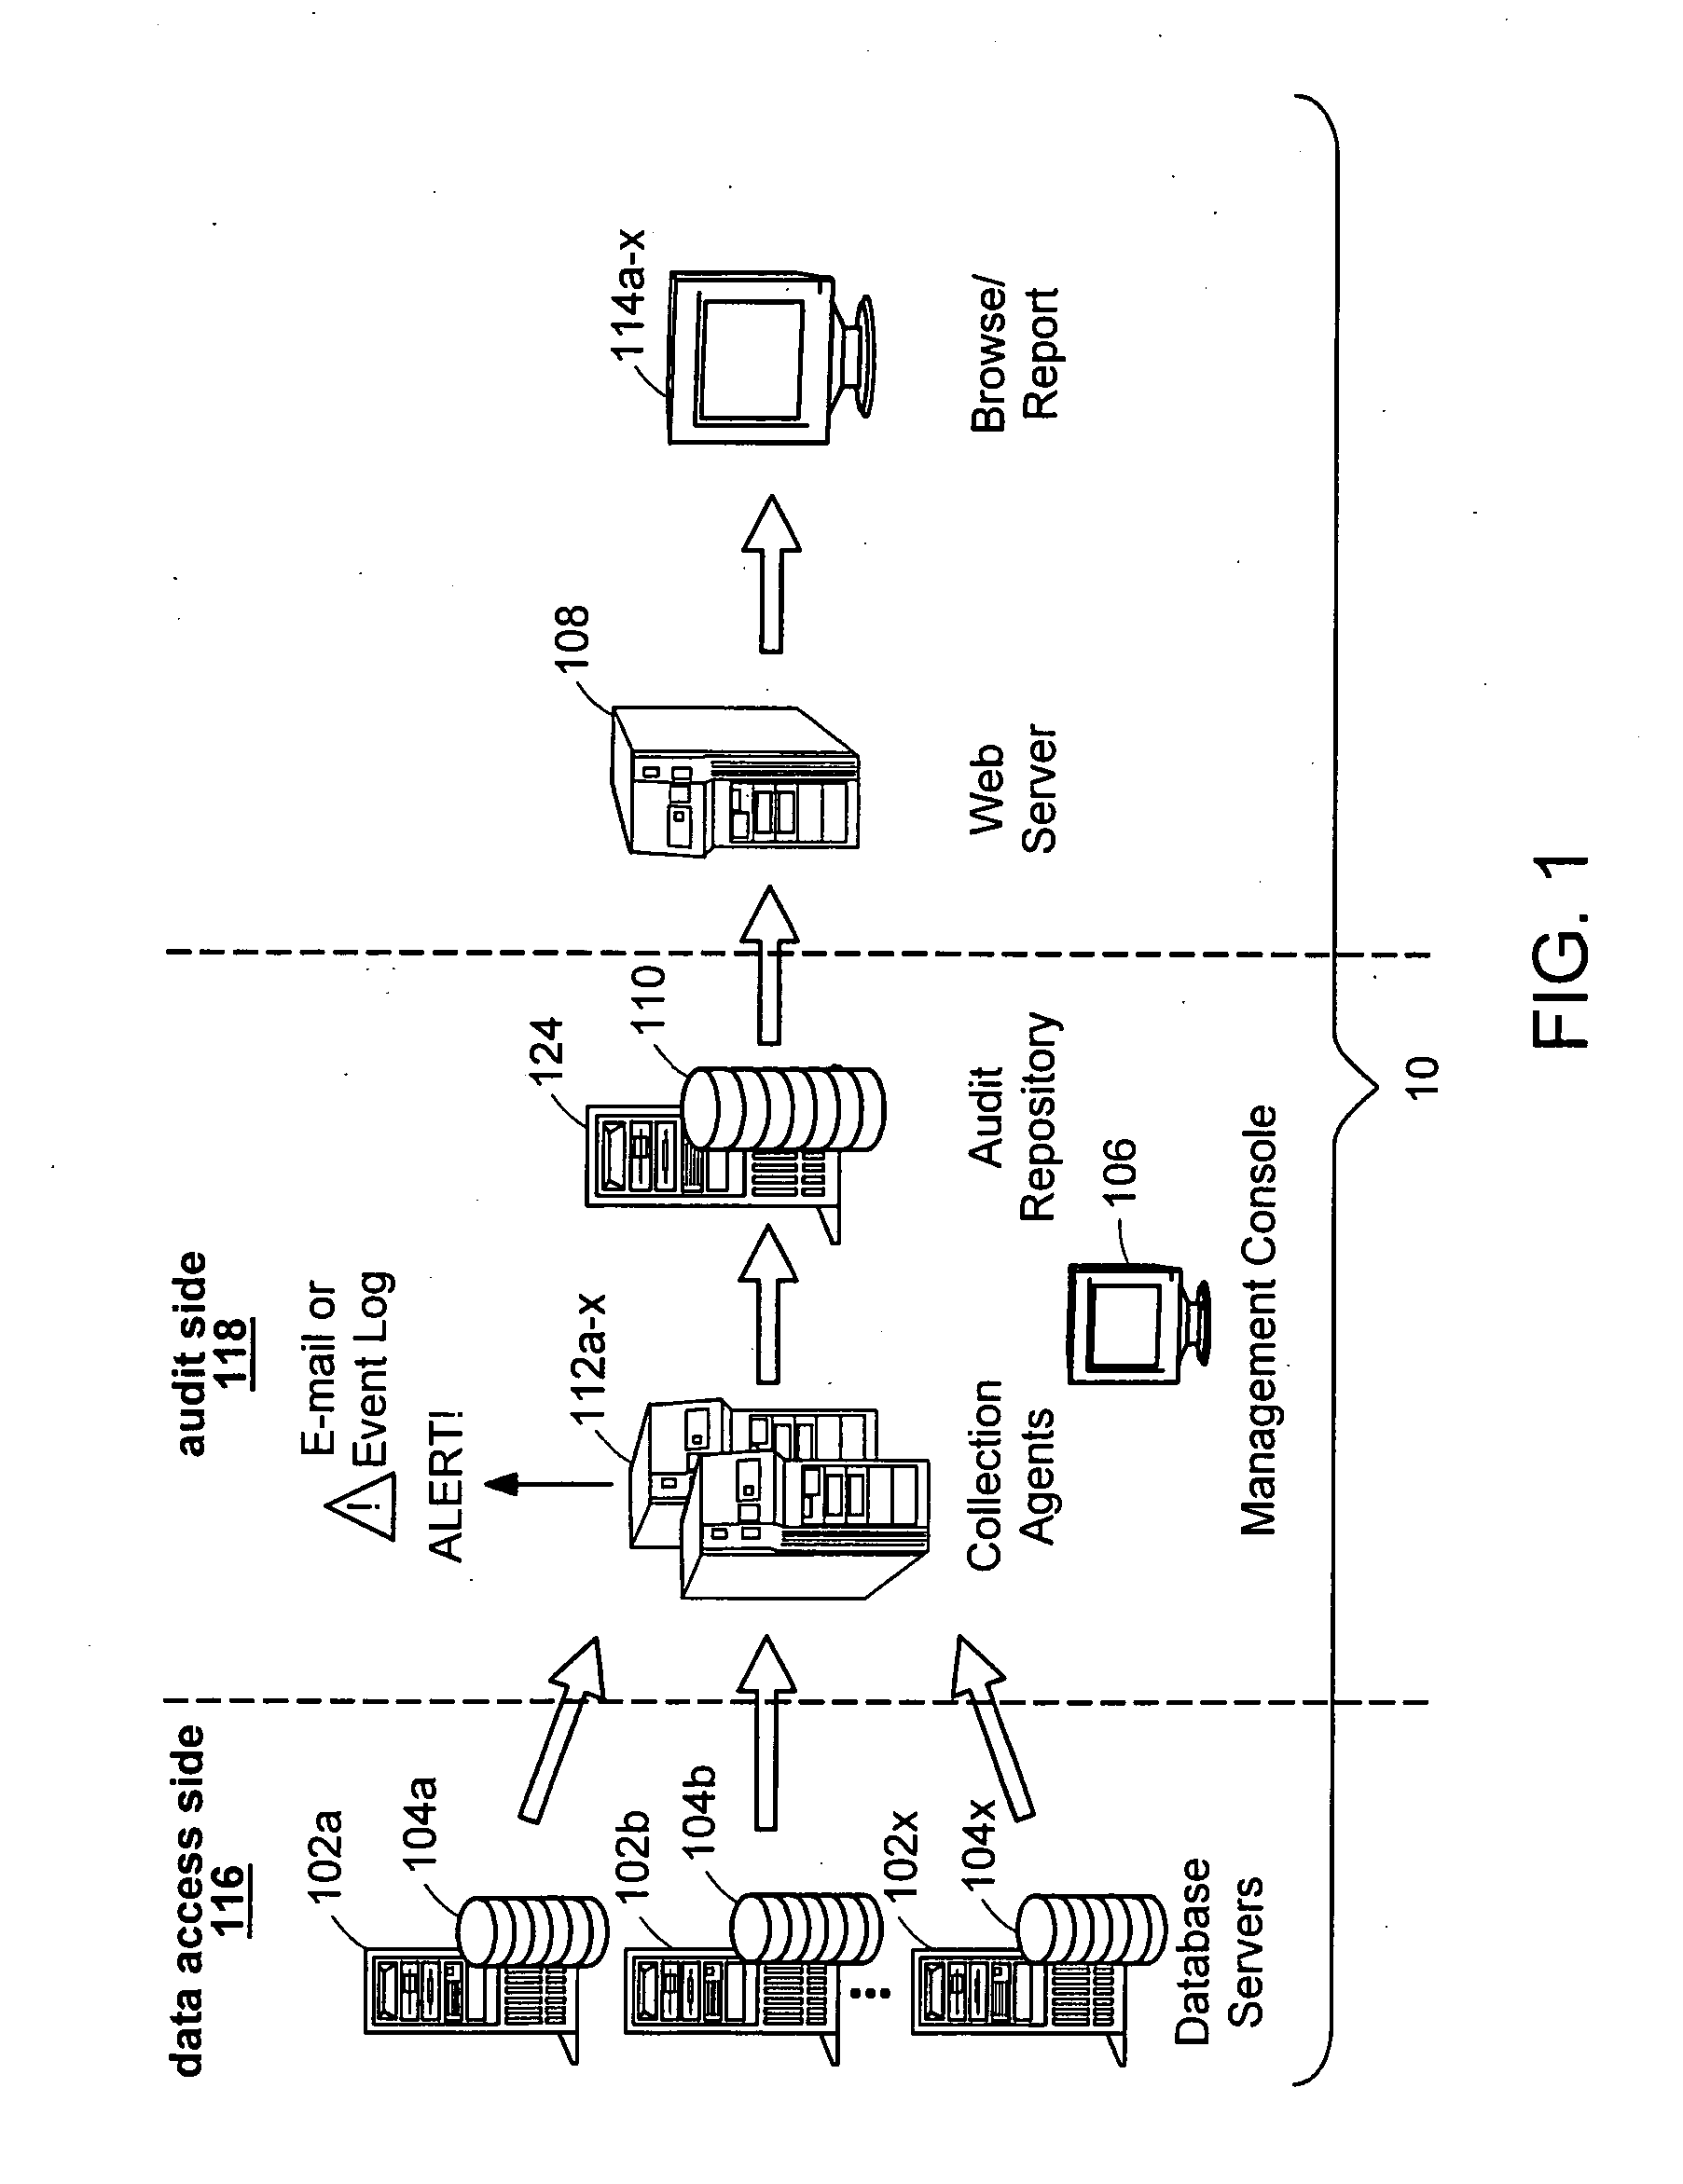 Separation of duties in a data audit system